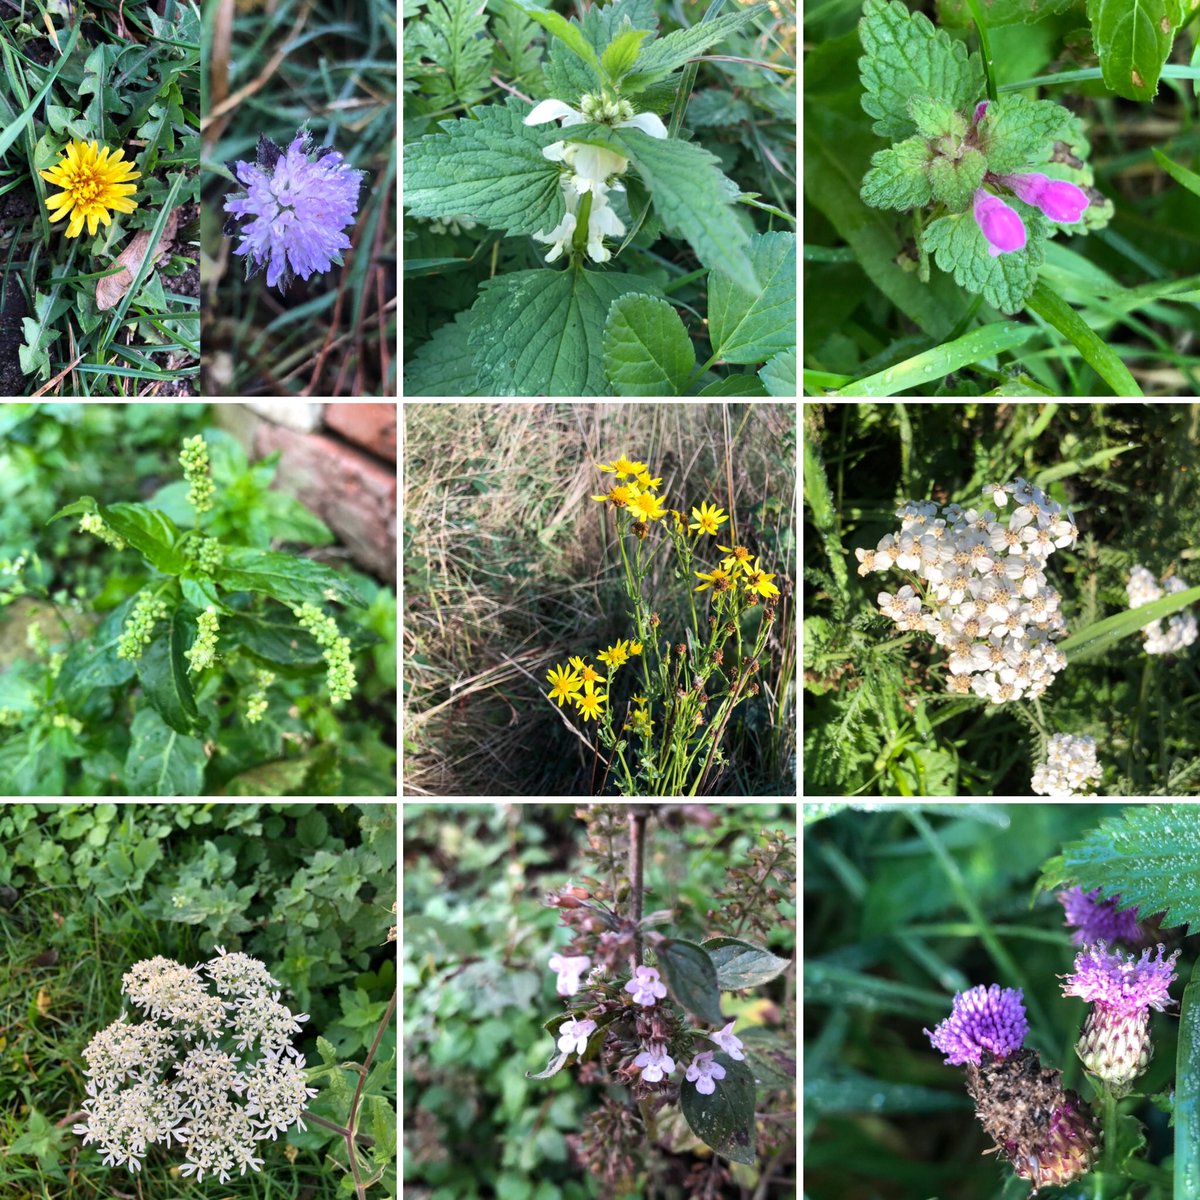 From this week’s wanderings in search of #TheWinter10. 
Dandelion, Field Scabious, White Dead-nettle, Red Dead-nettle, Annual Mercury, Ragwort, Yarrow, Common Hogweed, Lesser Calamint, Creeping Thistle. 
#WildflowerHour